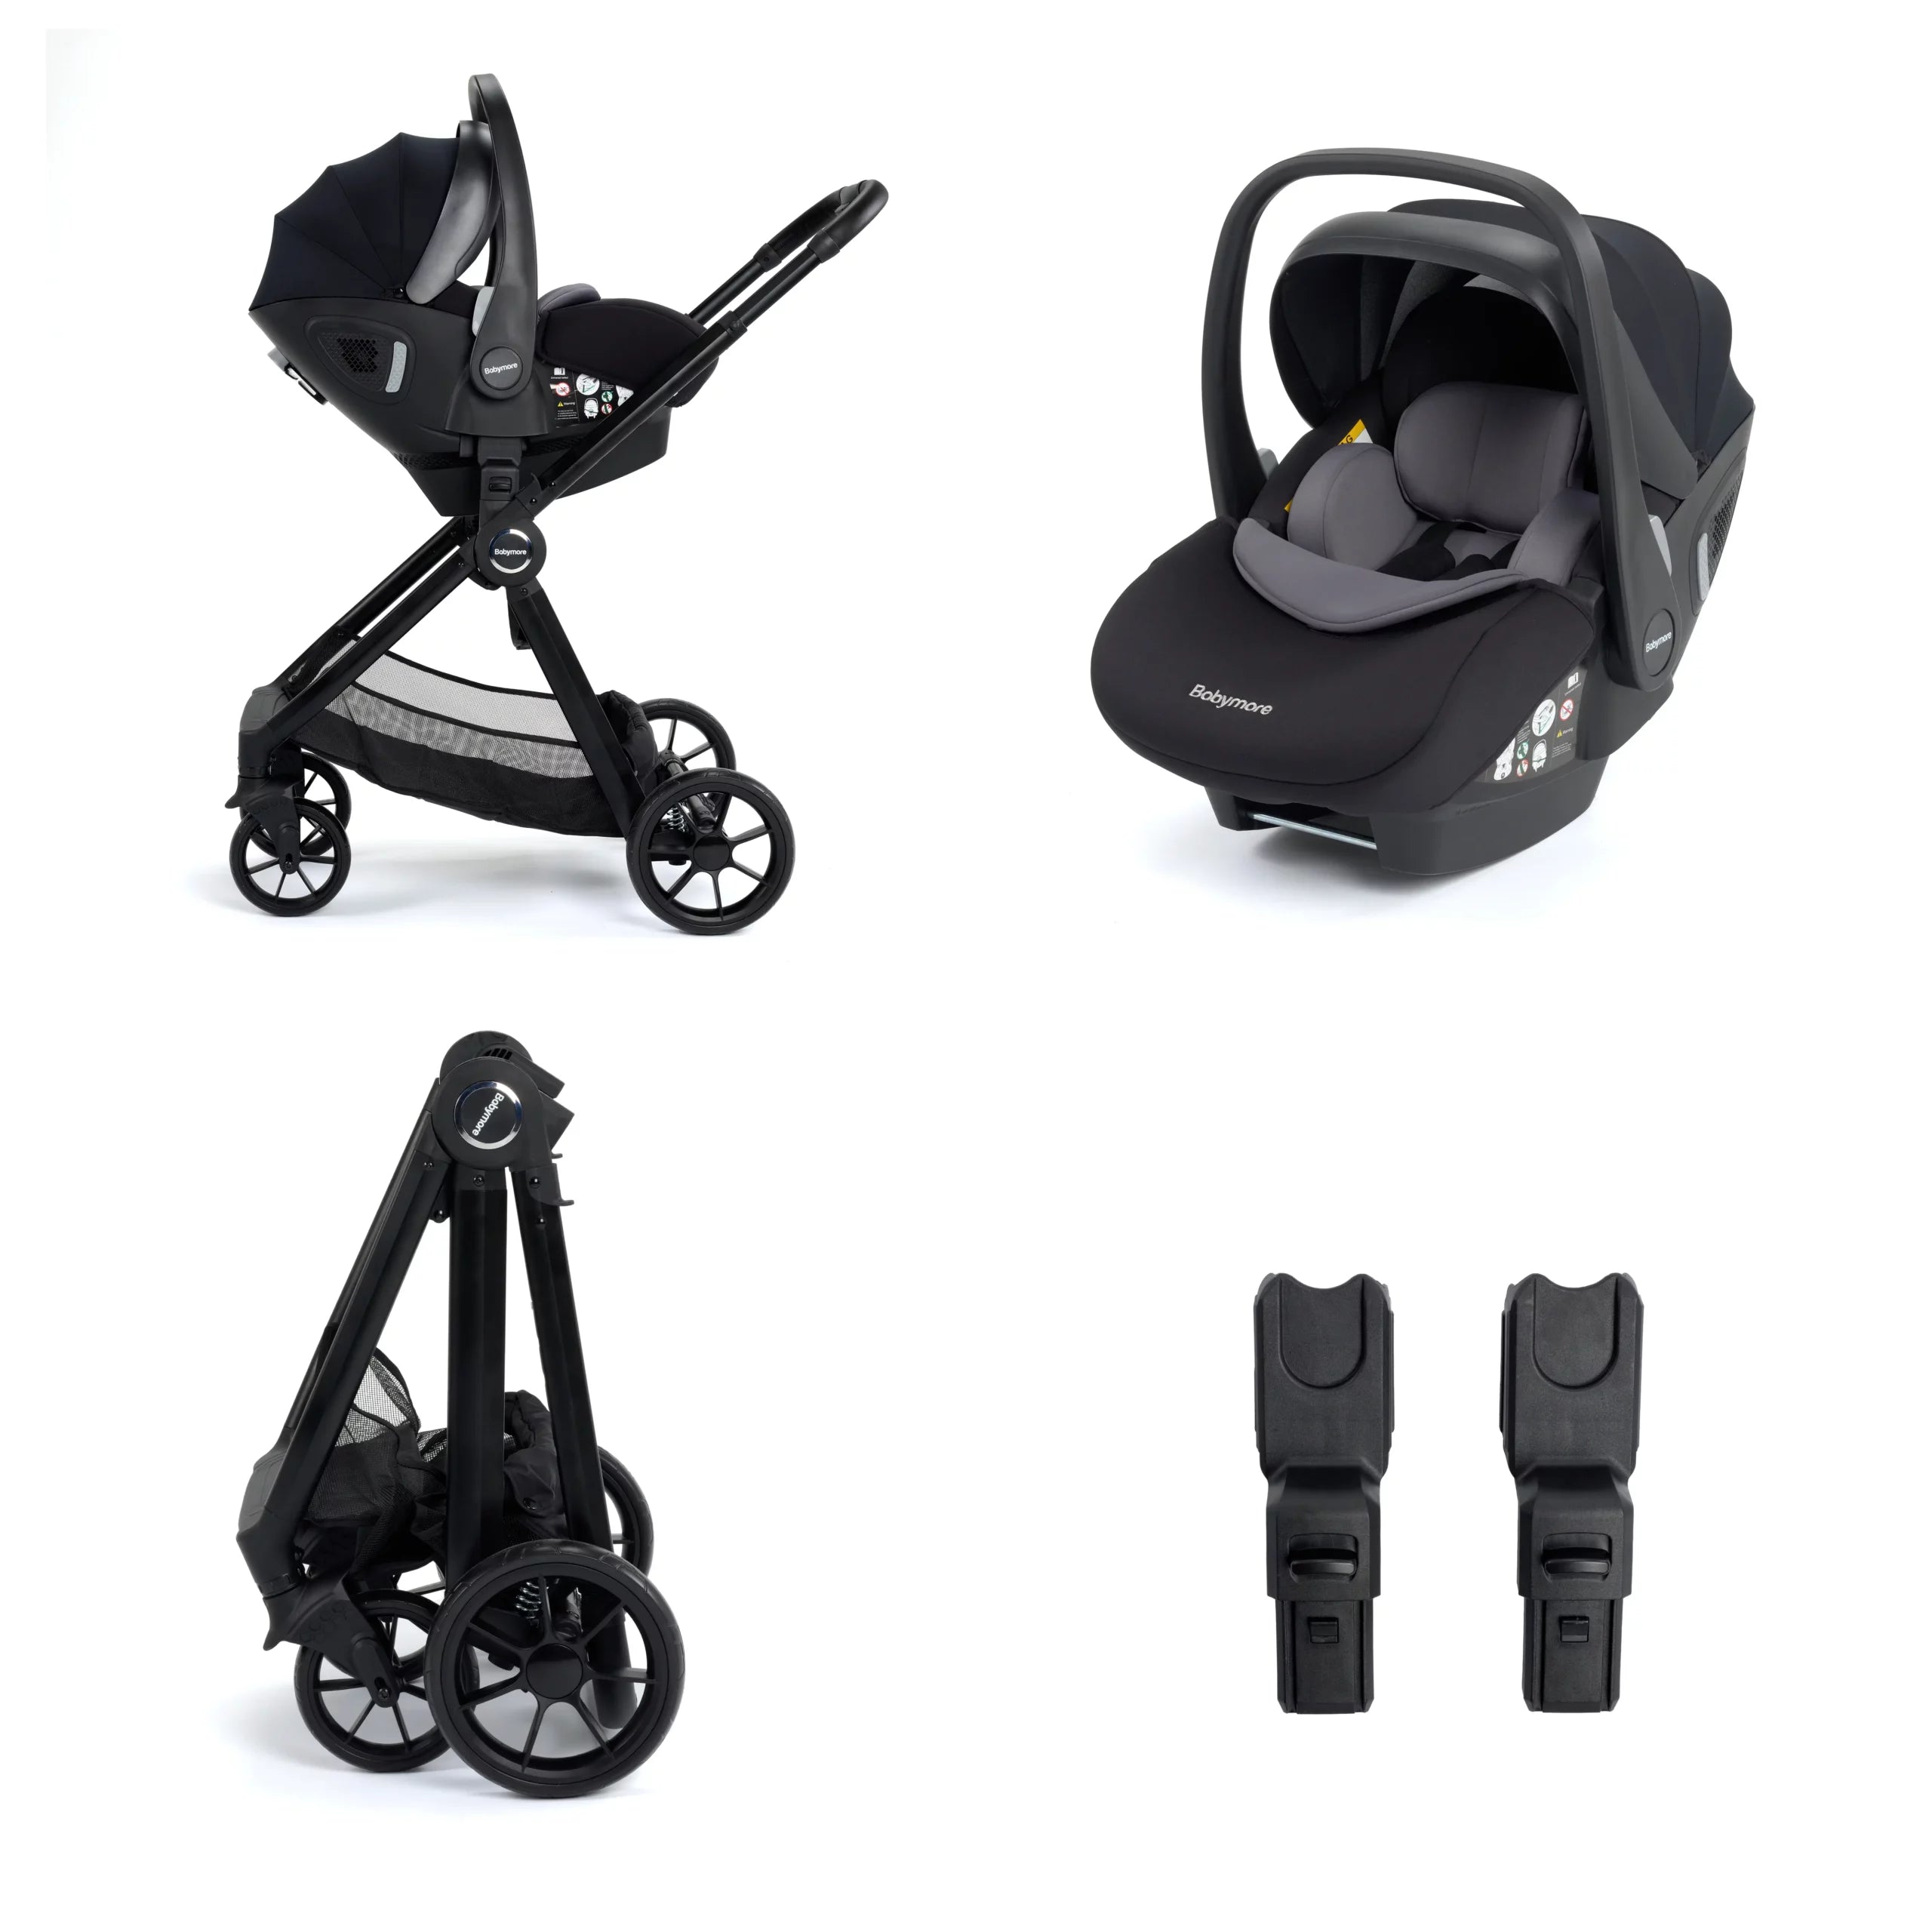 View Babymore Mimi Travel System Pecan iSize Car Seat Black information